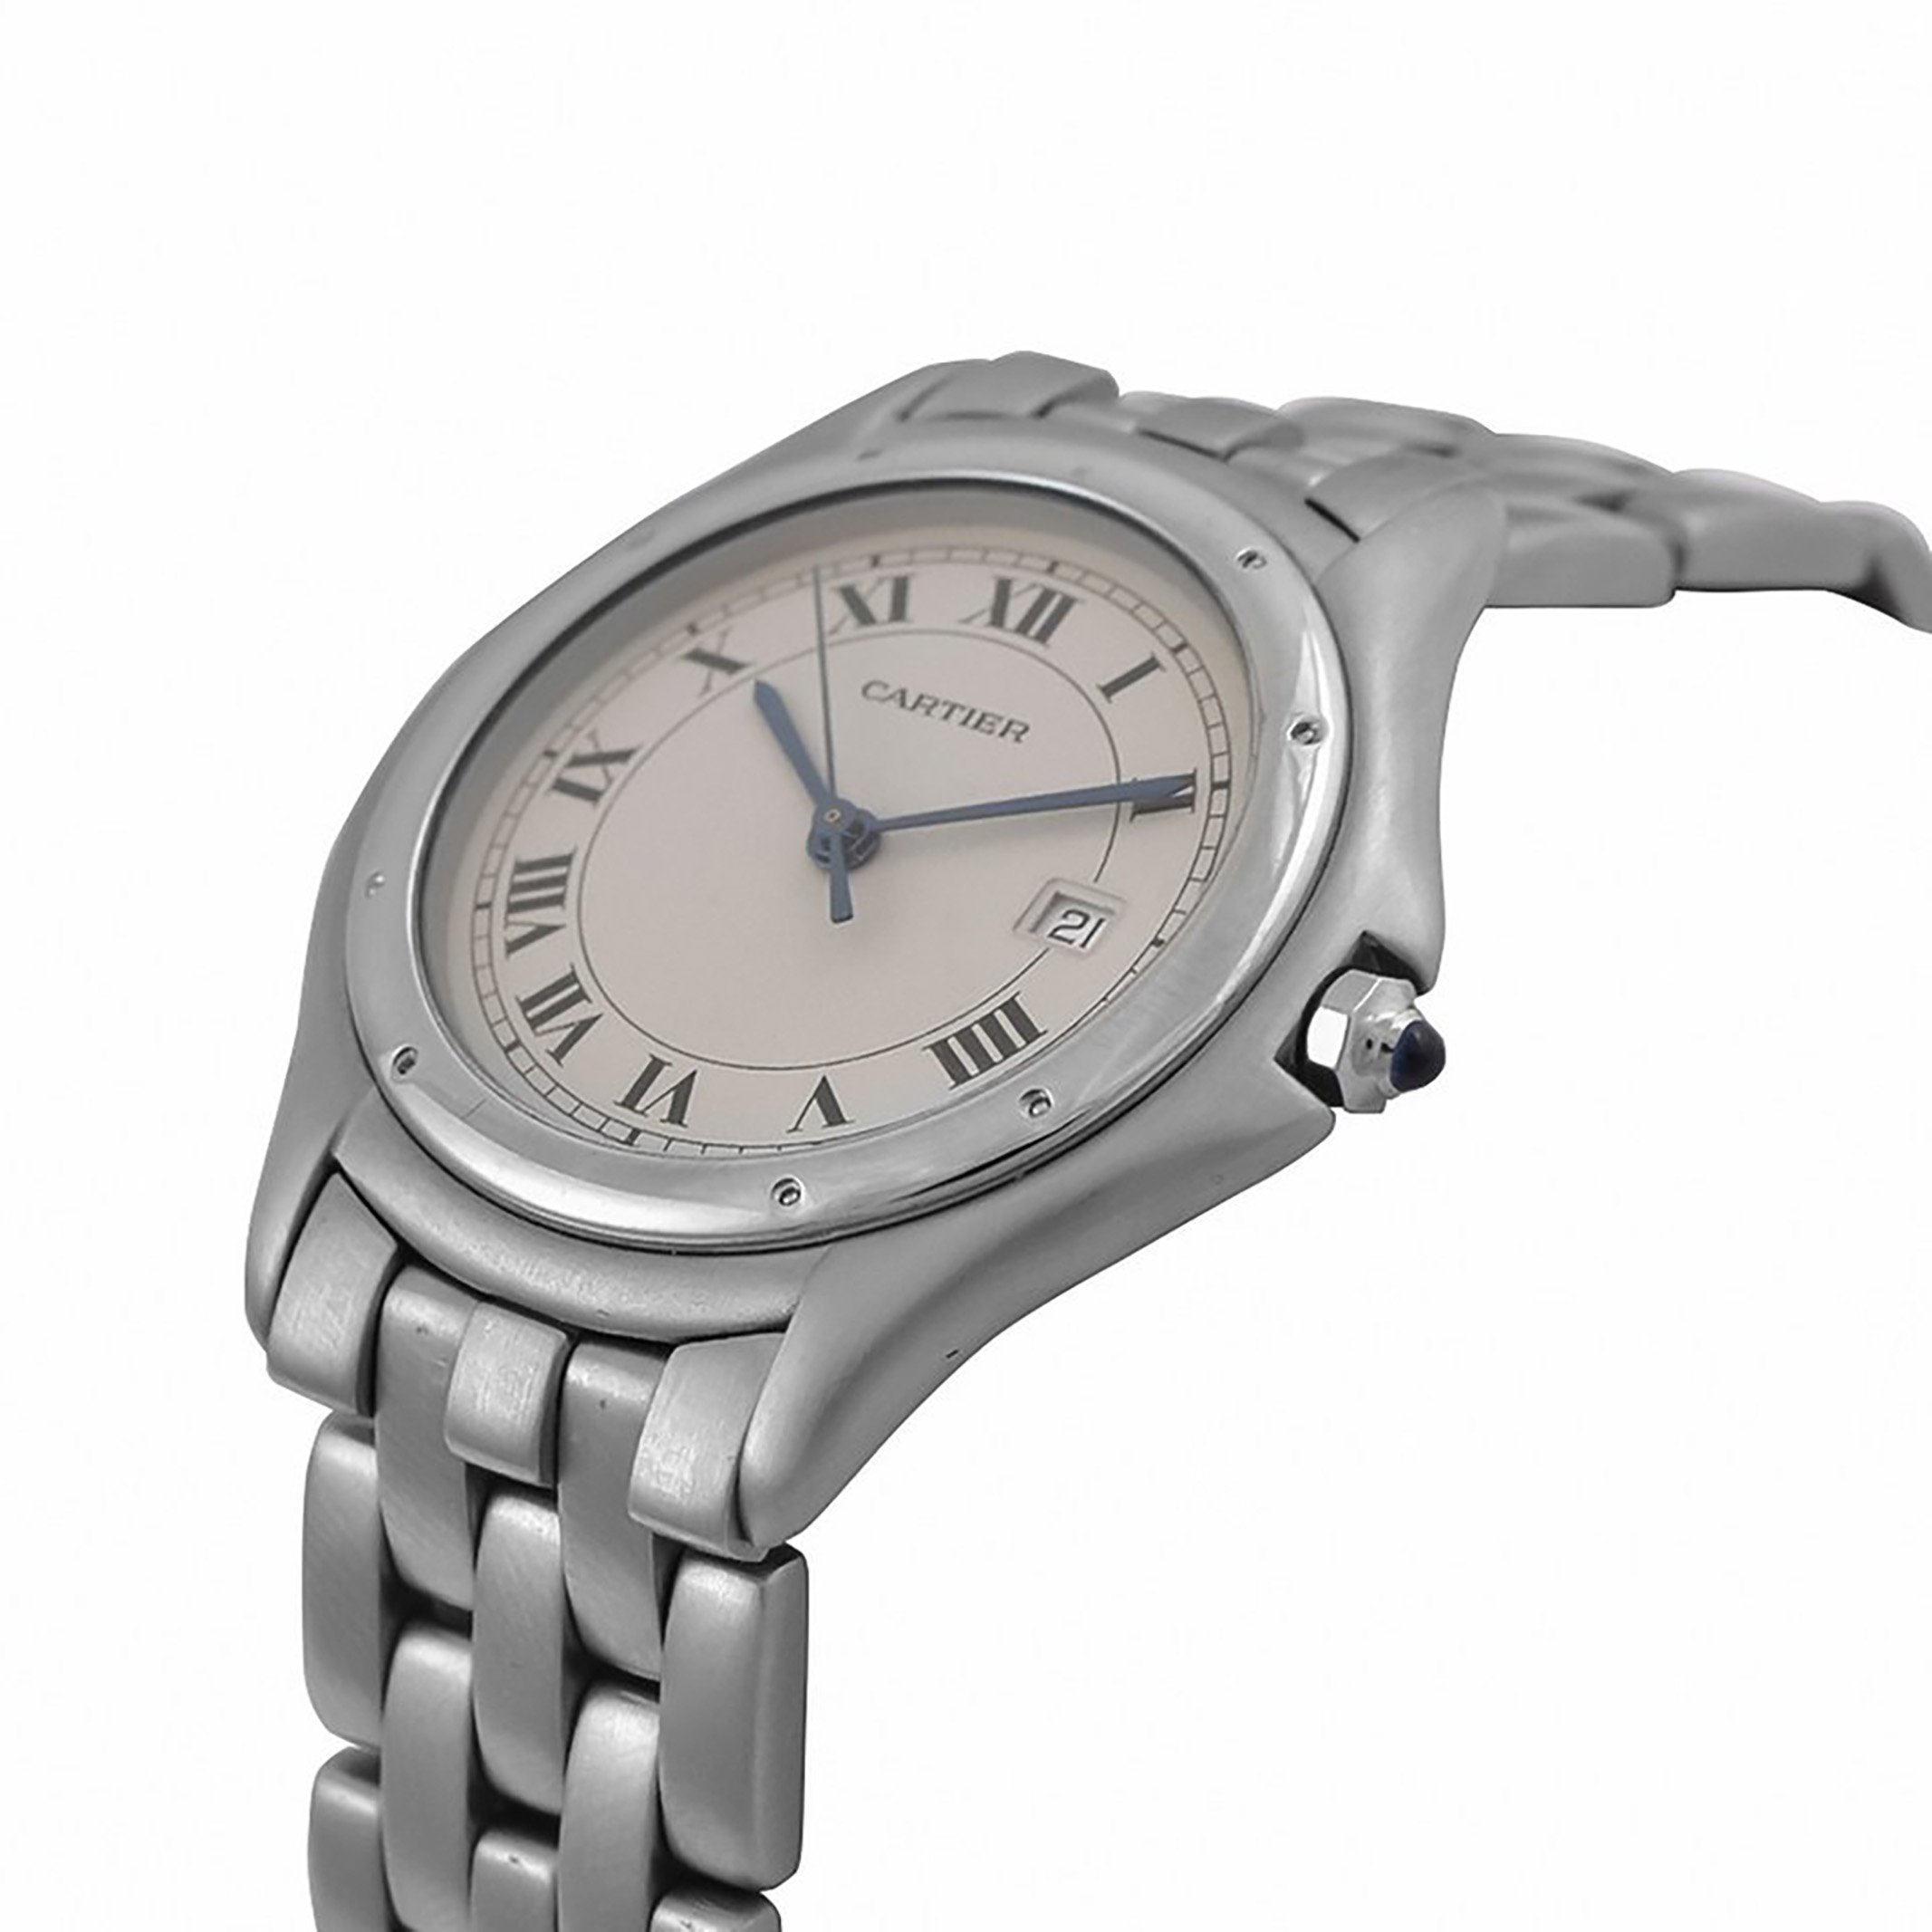 Cartier Cougar cadet wristwatch in steel white dial - Image 2 of 5